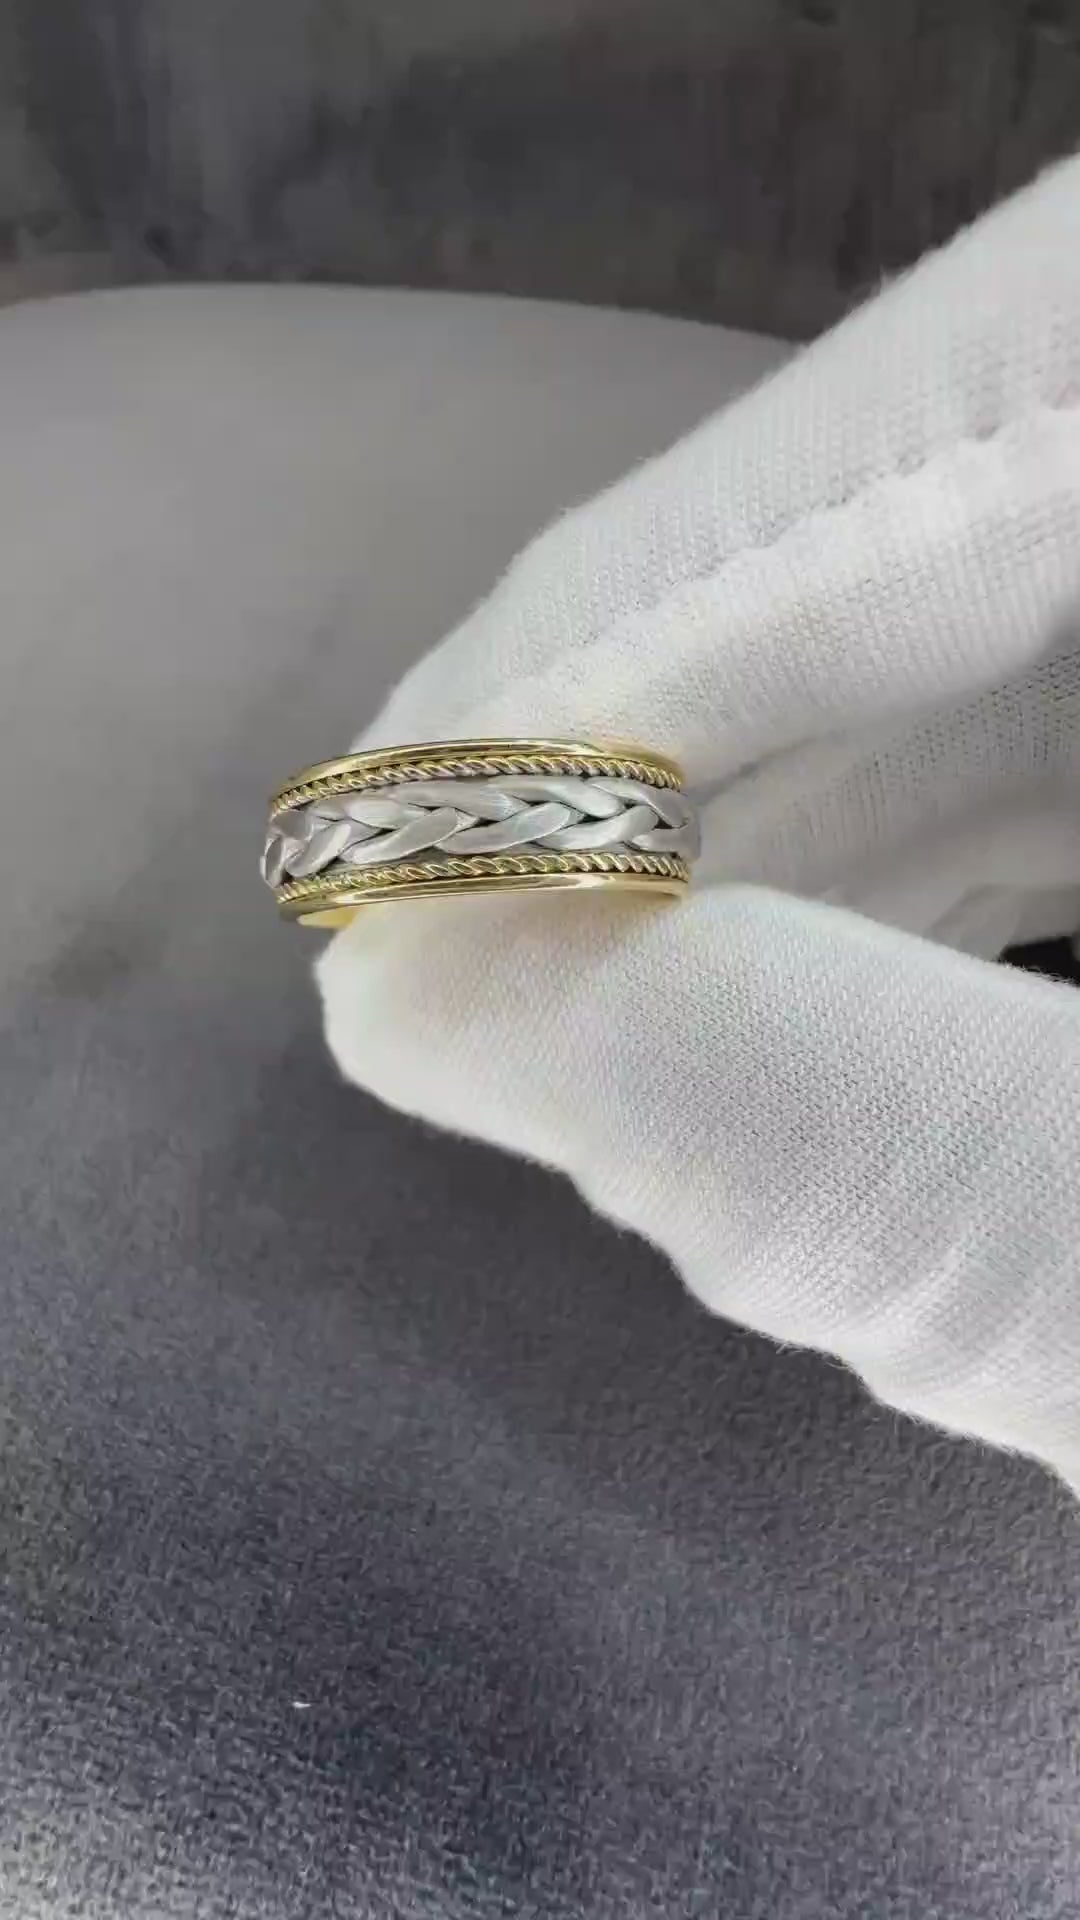 7MM Two Tone White Soft Braid With Yellow Gold Rope Wedding Band